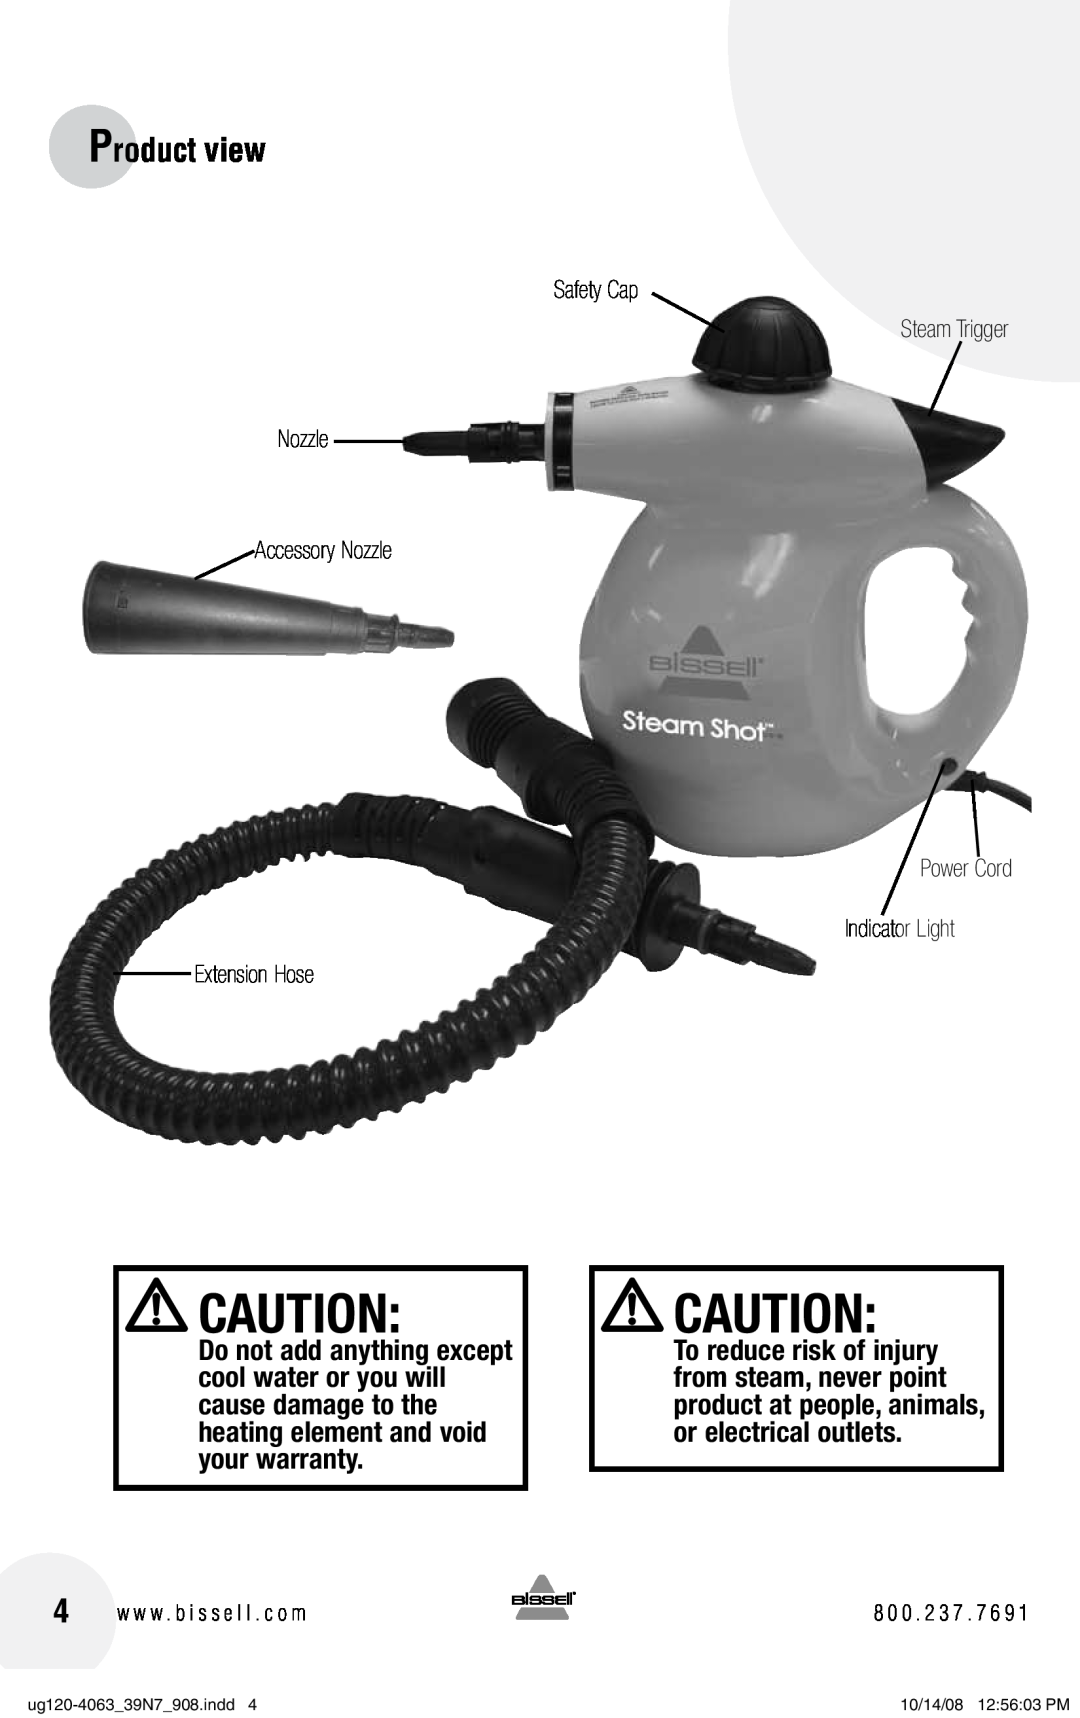 Bissell 39N7 Product view, Safety Cap Steam Trigger Nozzle Accessory Nozzle Power Cord, Indicator Light Extension Hose 